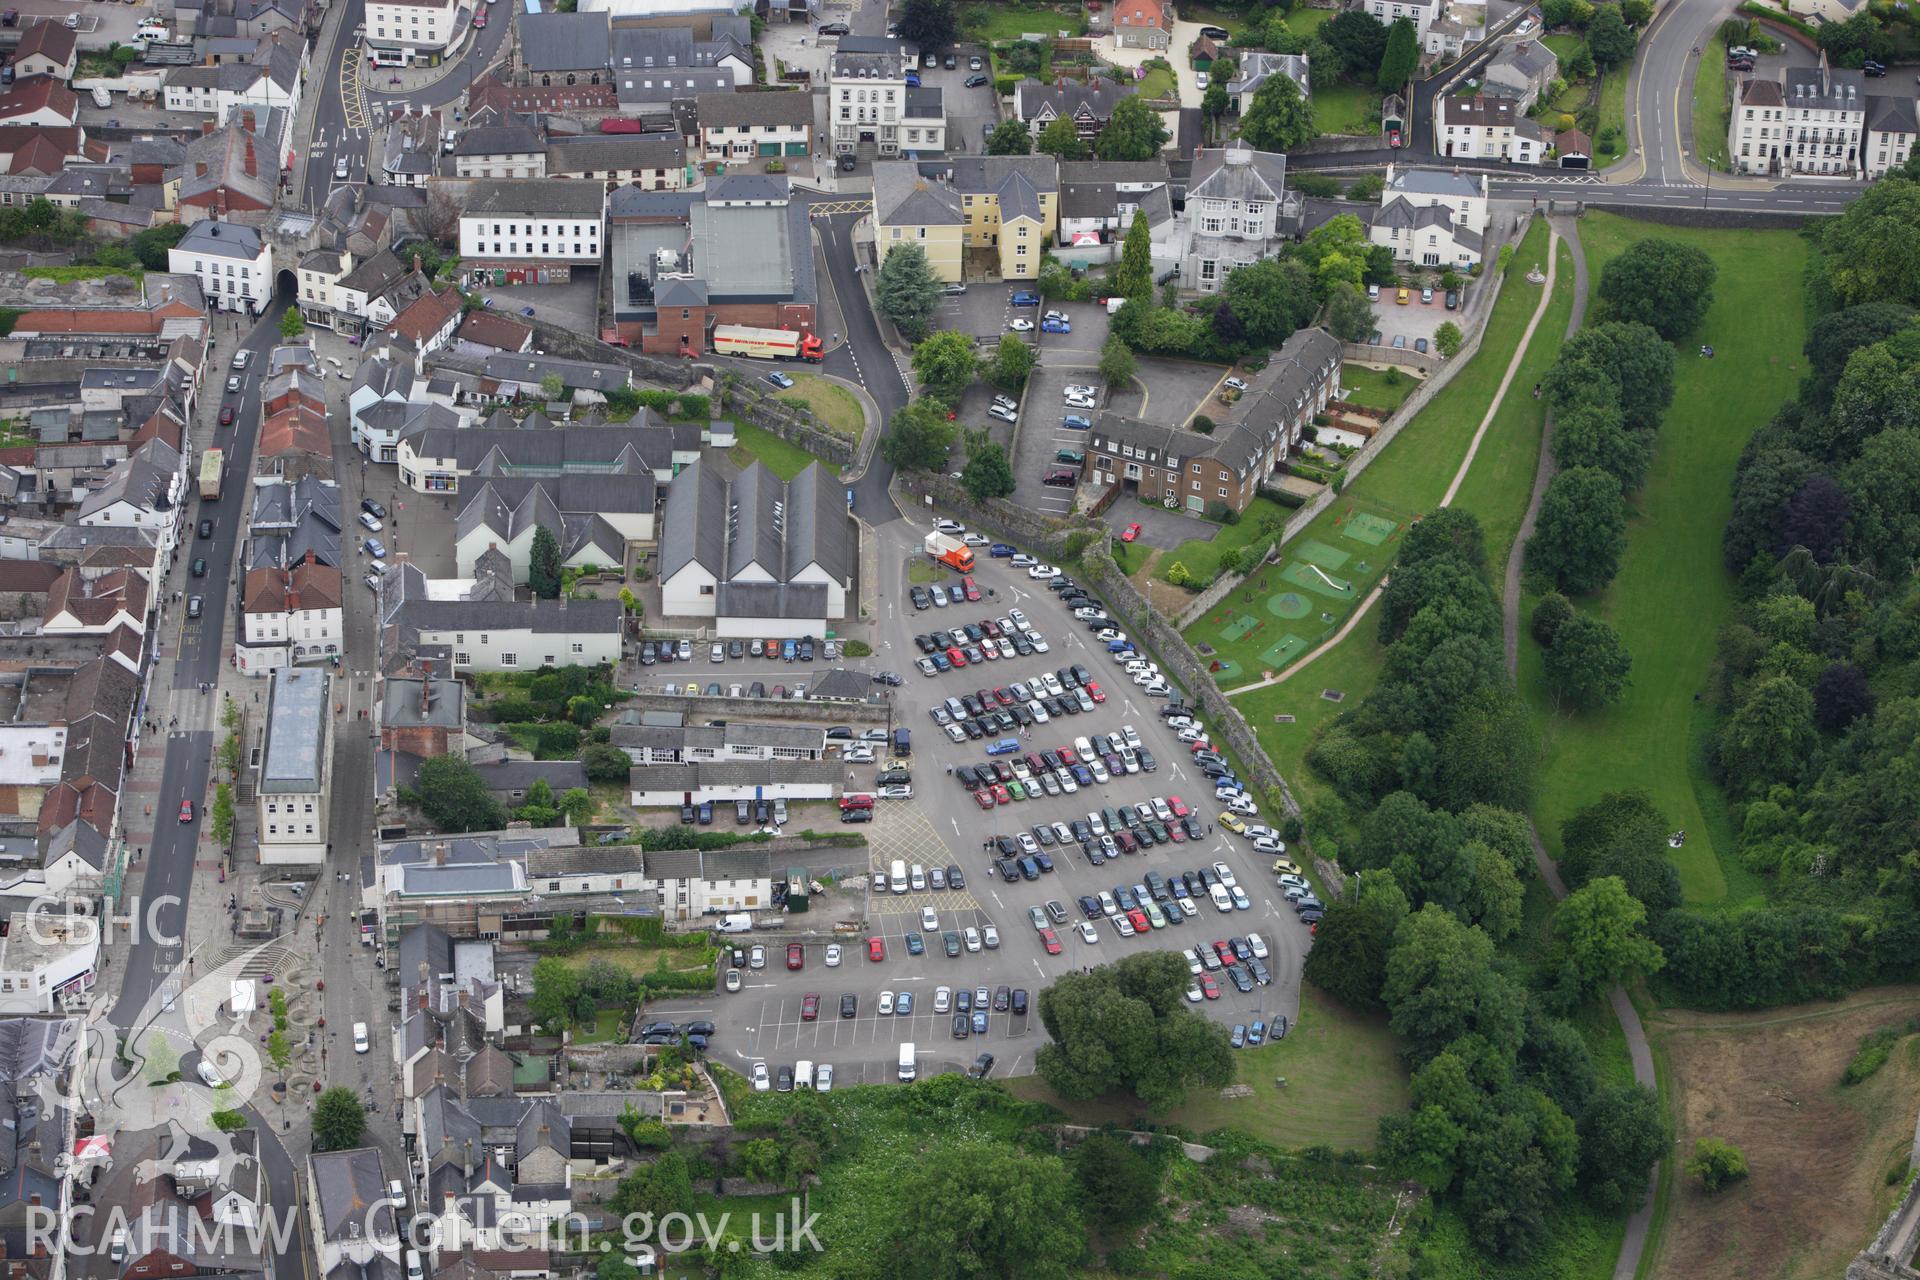 RCAHMW colour oblique aerial photograph of Chepstow Town Wall and Gate. Taken on 09 July 2009 by Toby Driver